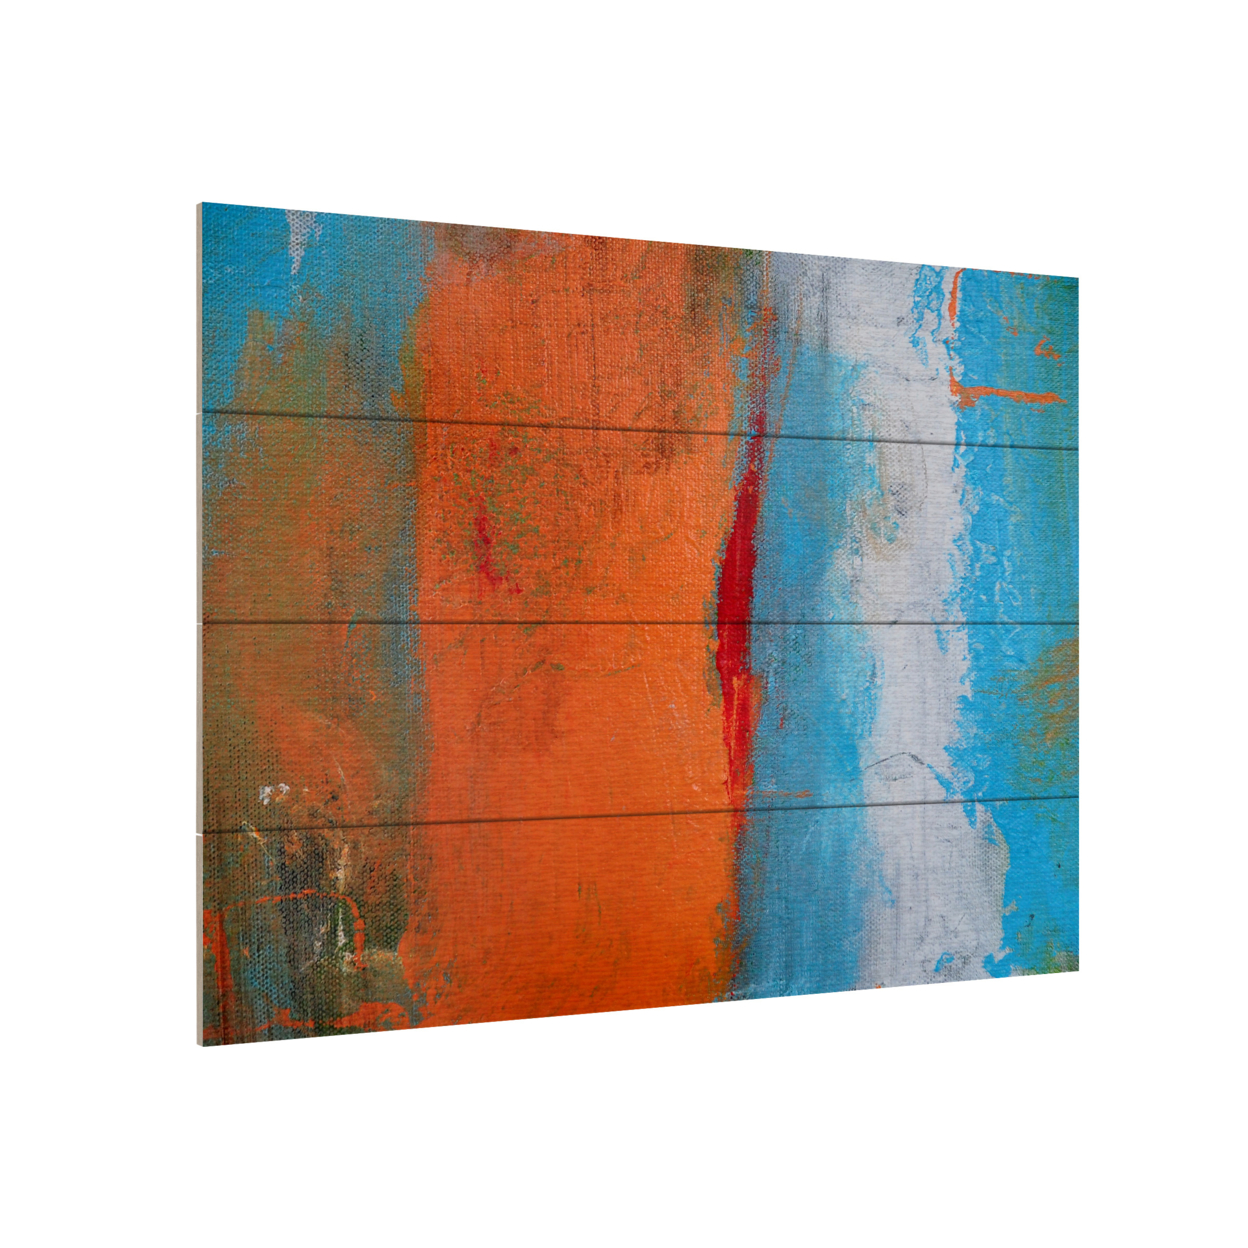 Wall Art 12 X 16 Inches Titled Orange Swatch Ready To Hang Printed On Wooden Planks